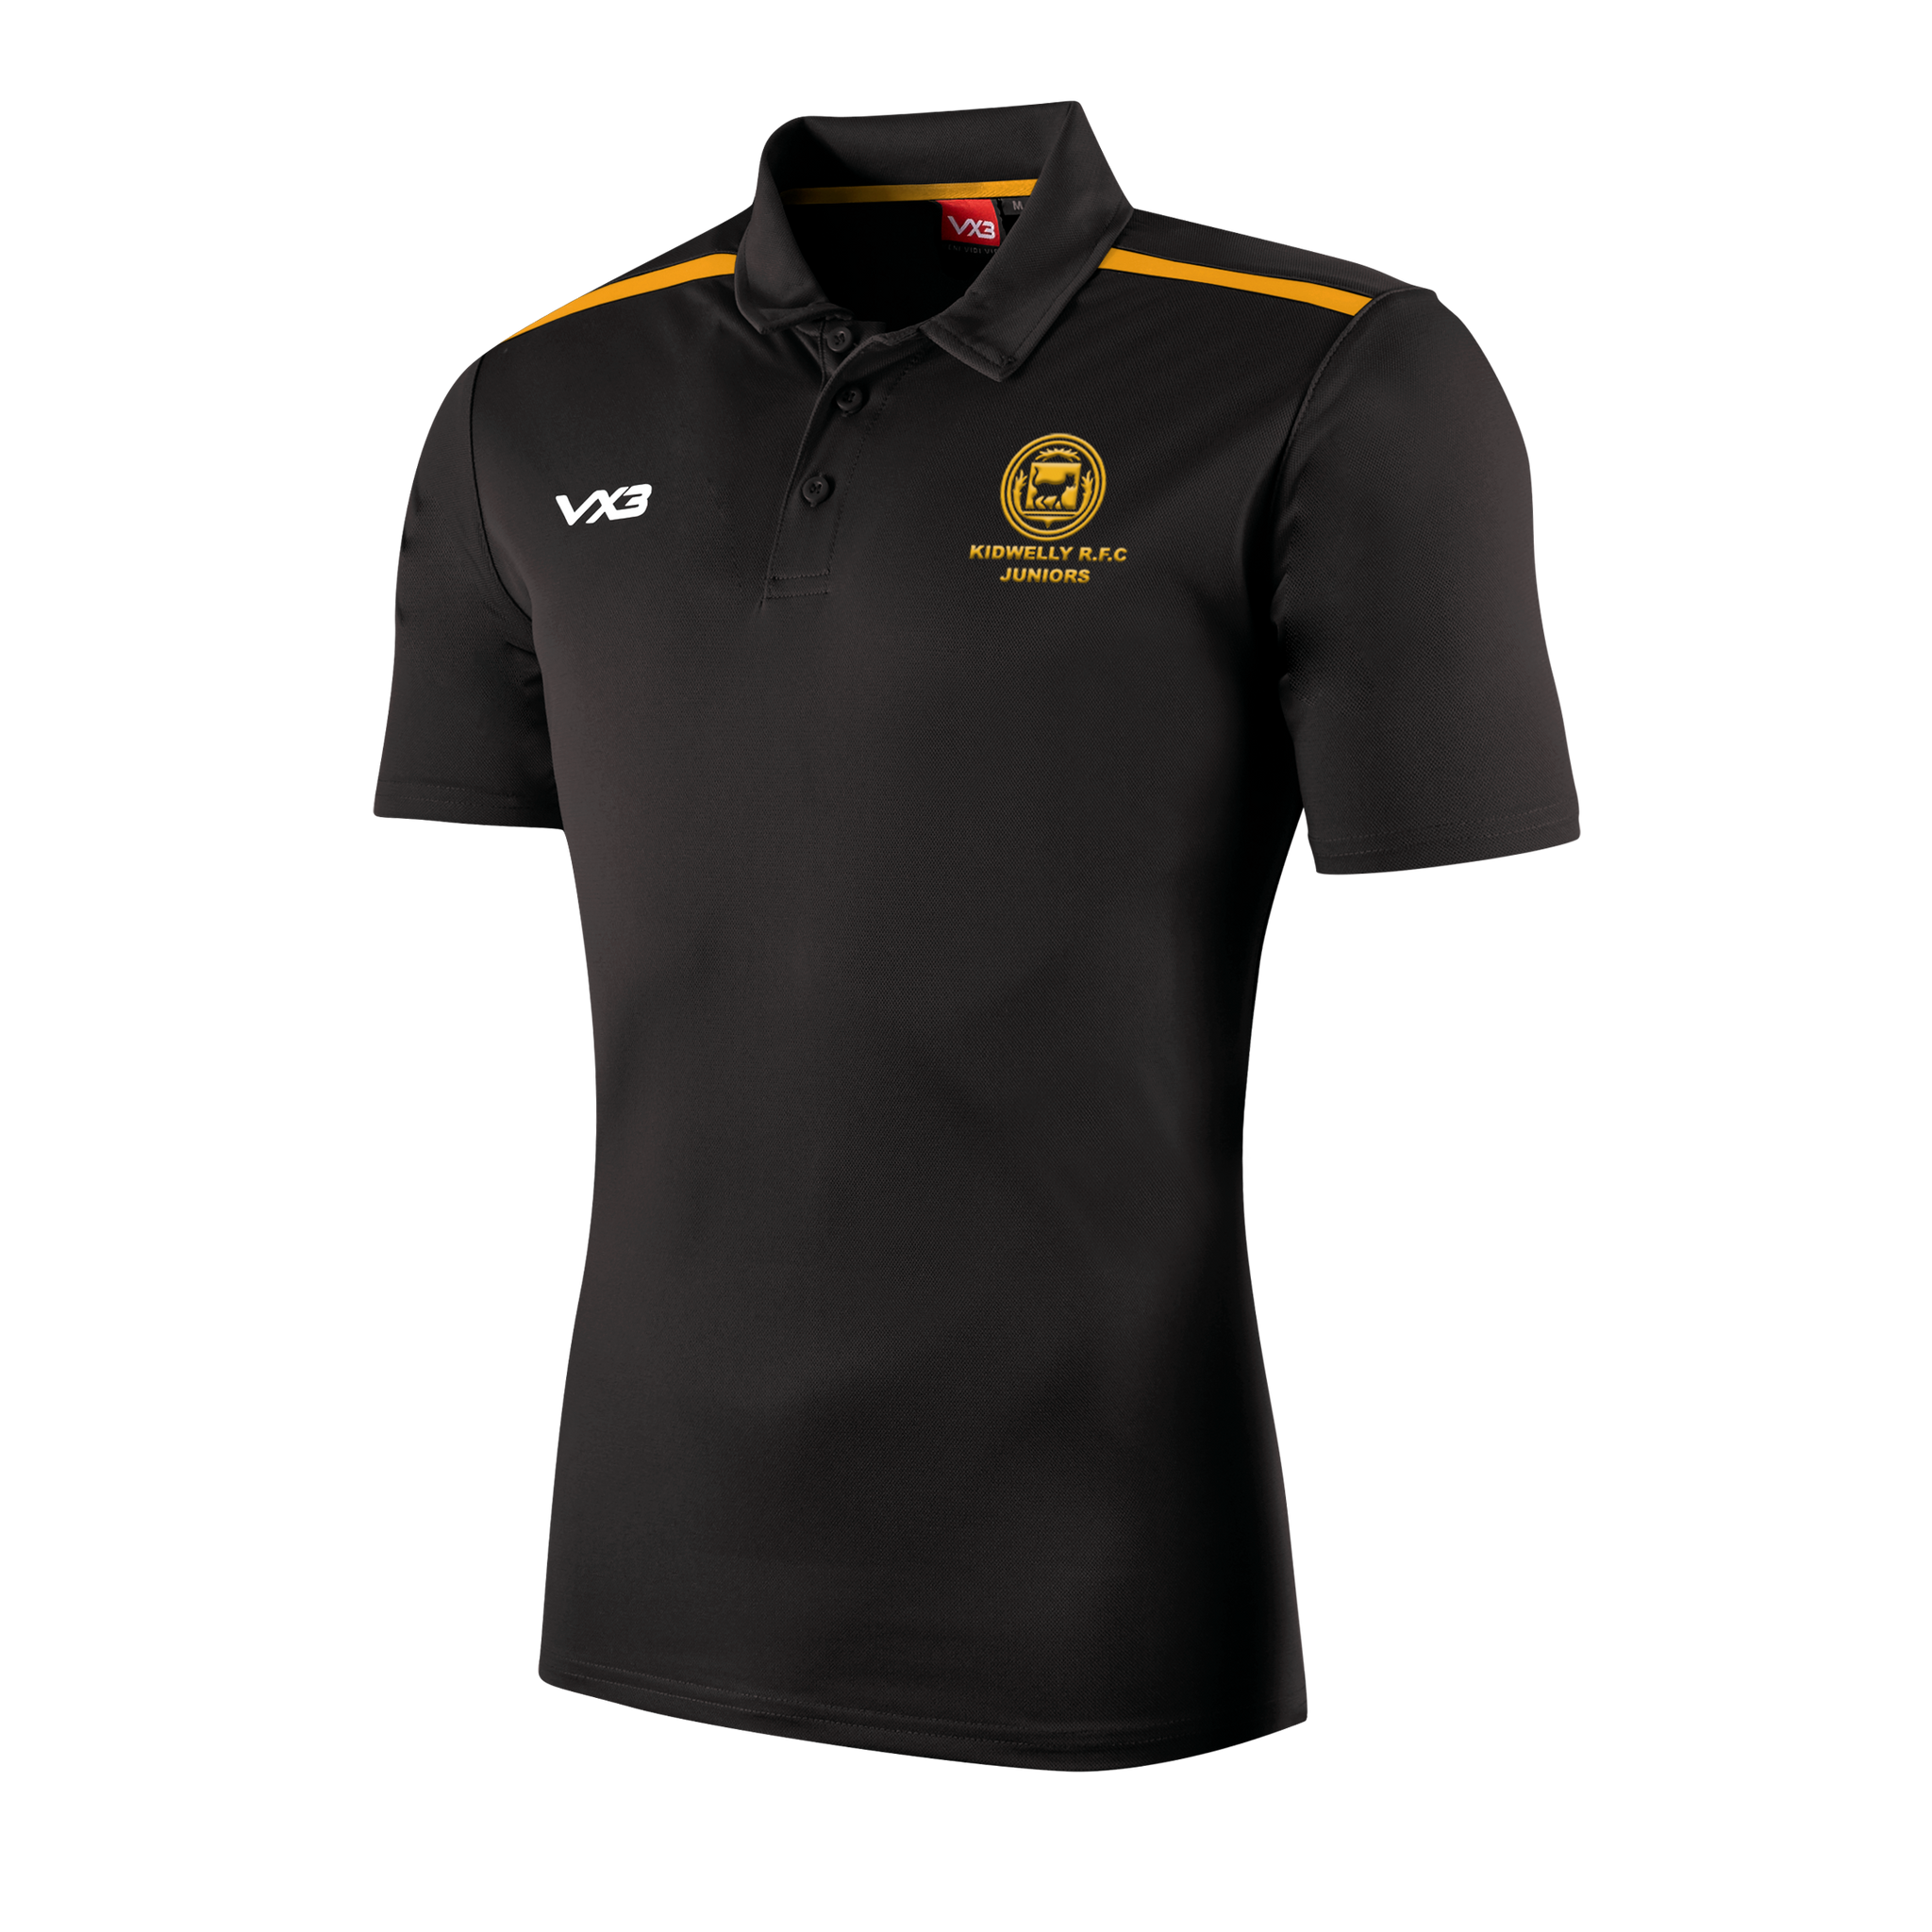 Kidwelly RFC Juniors Fortis Youth Polo